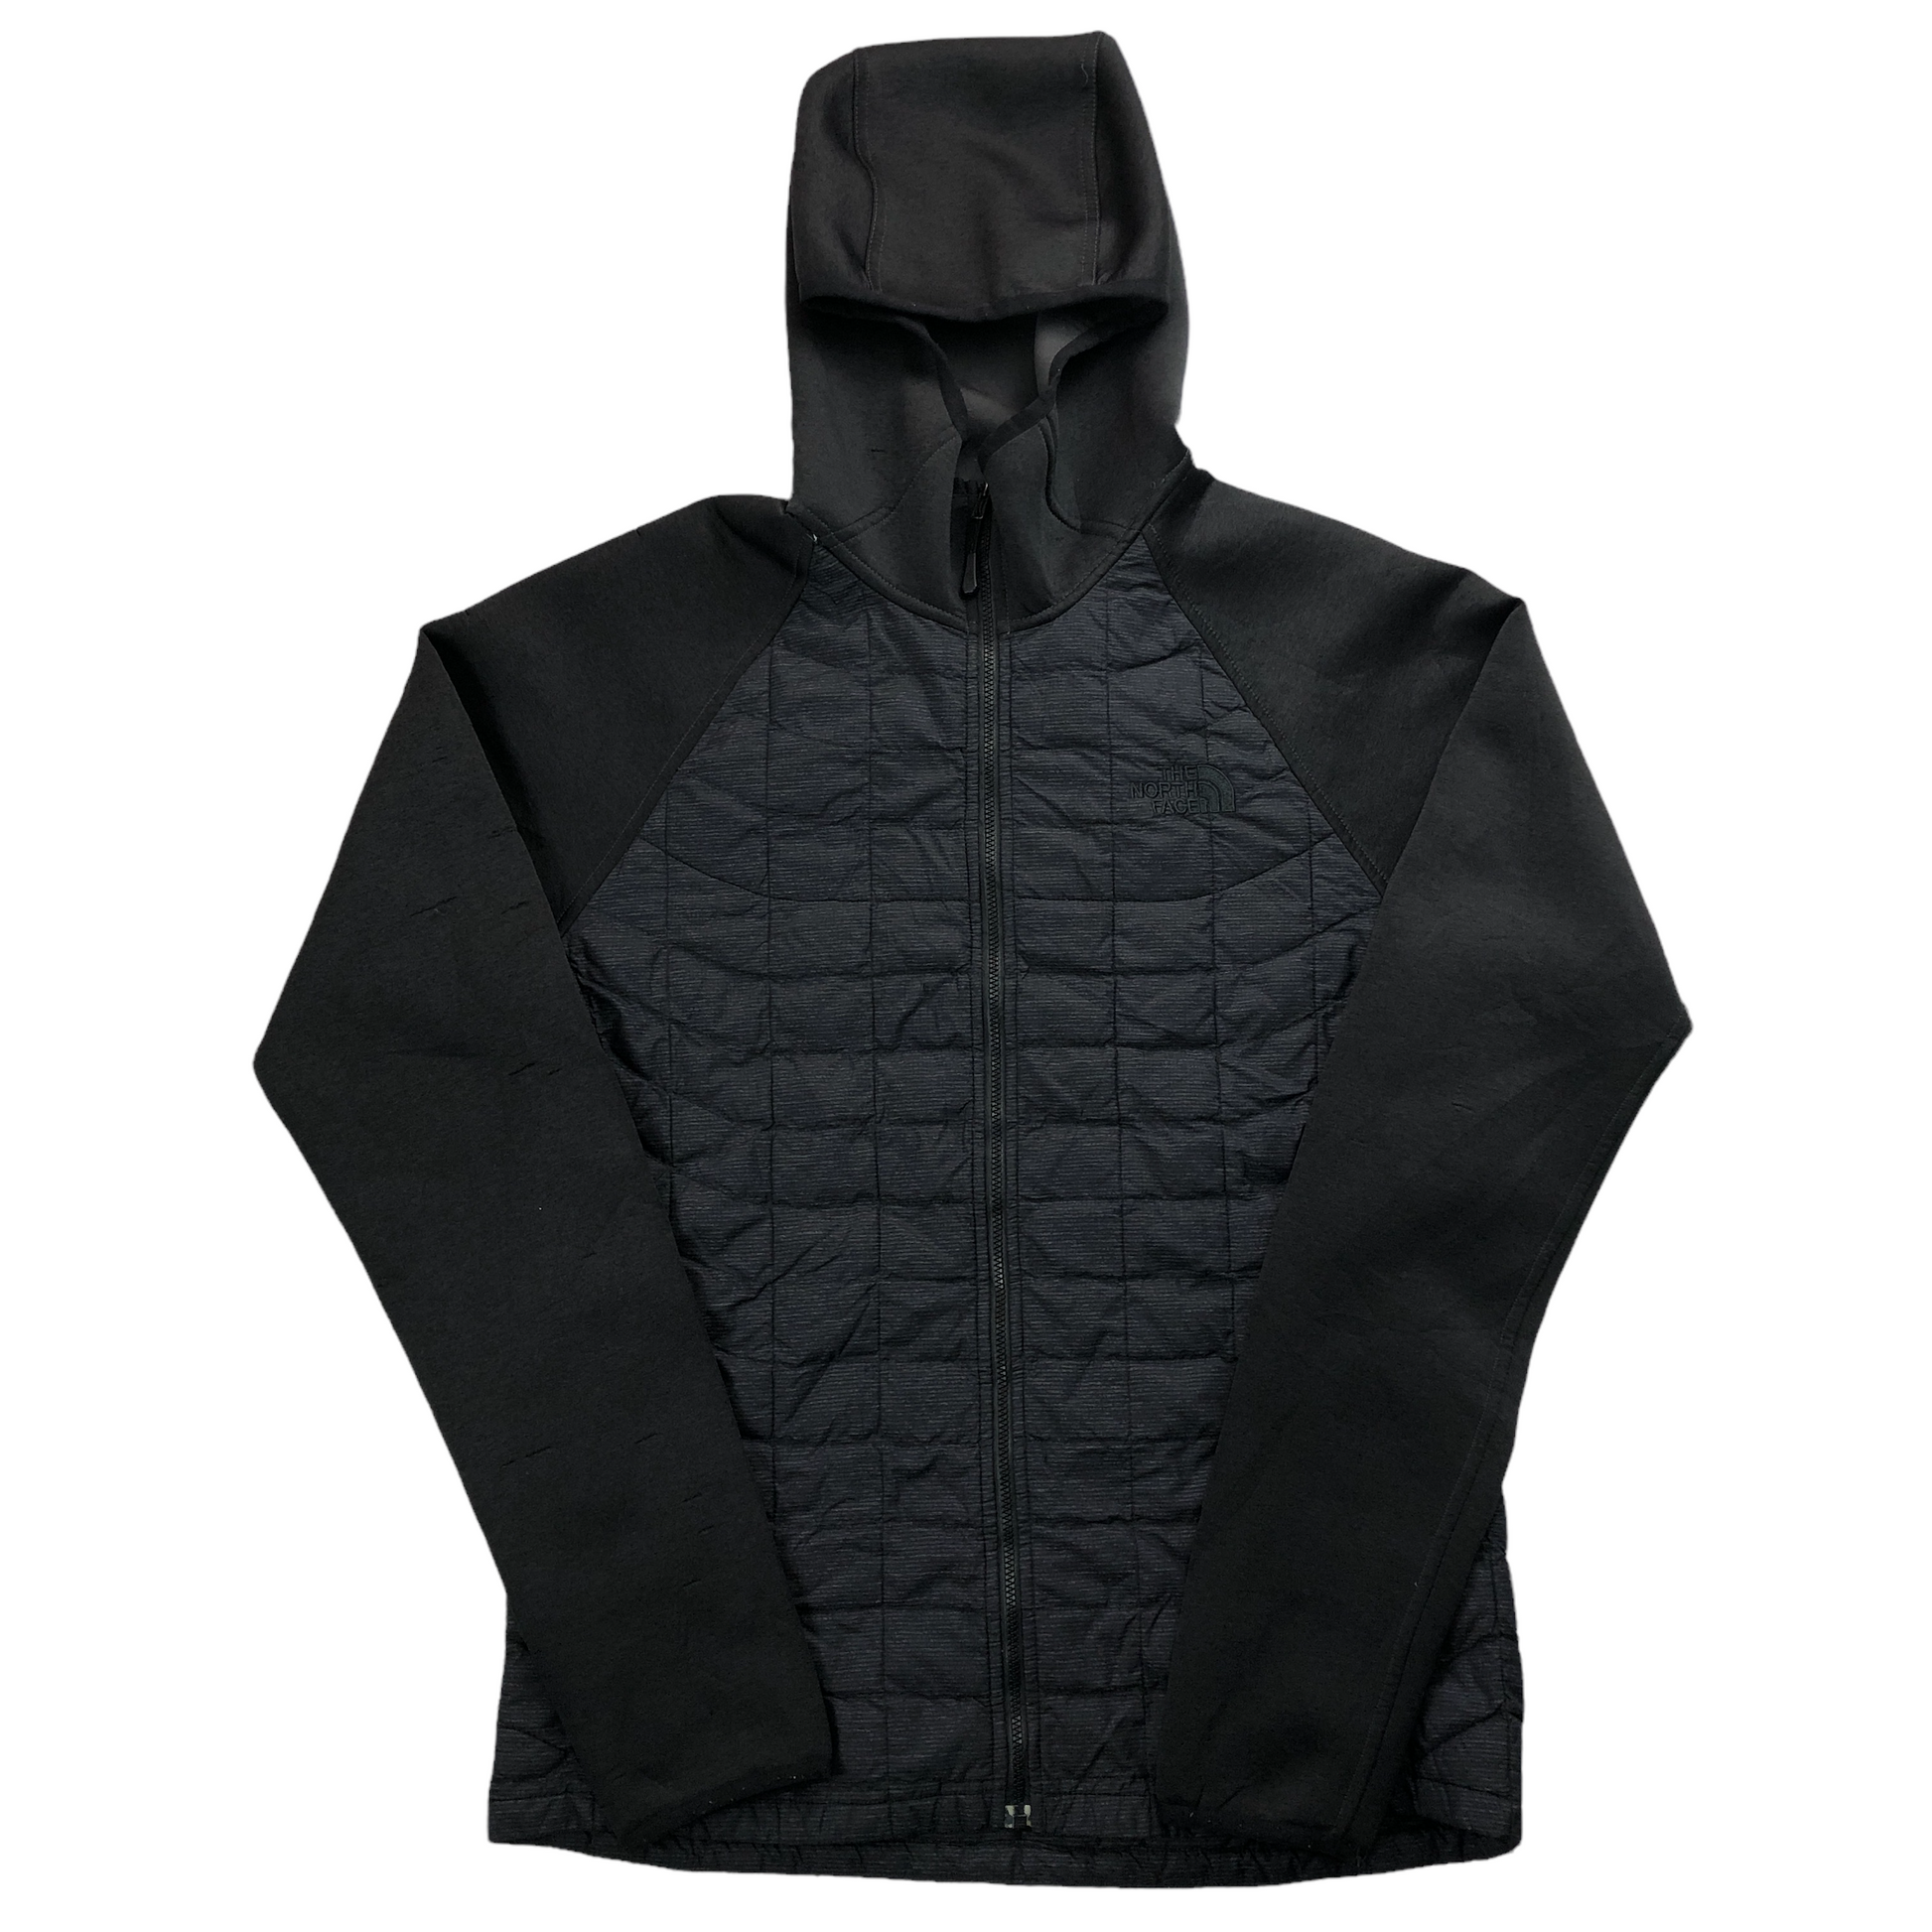 THE NORTH FACE  THERMOBALL JACKET サーモボール